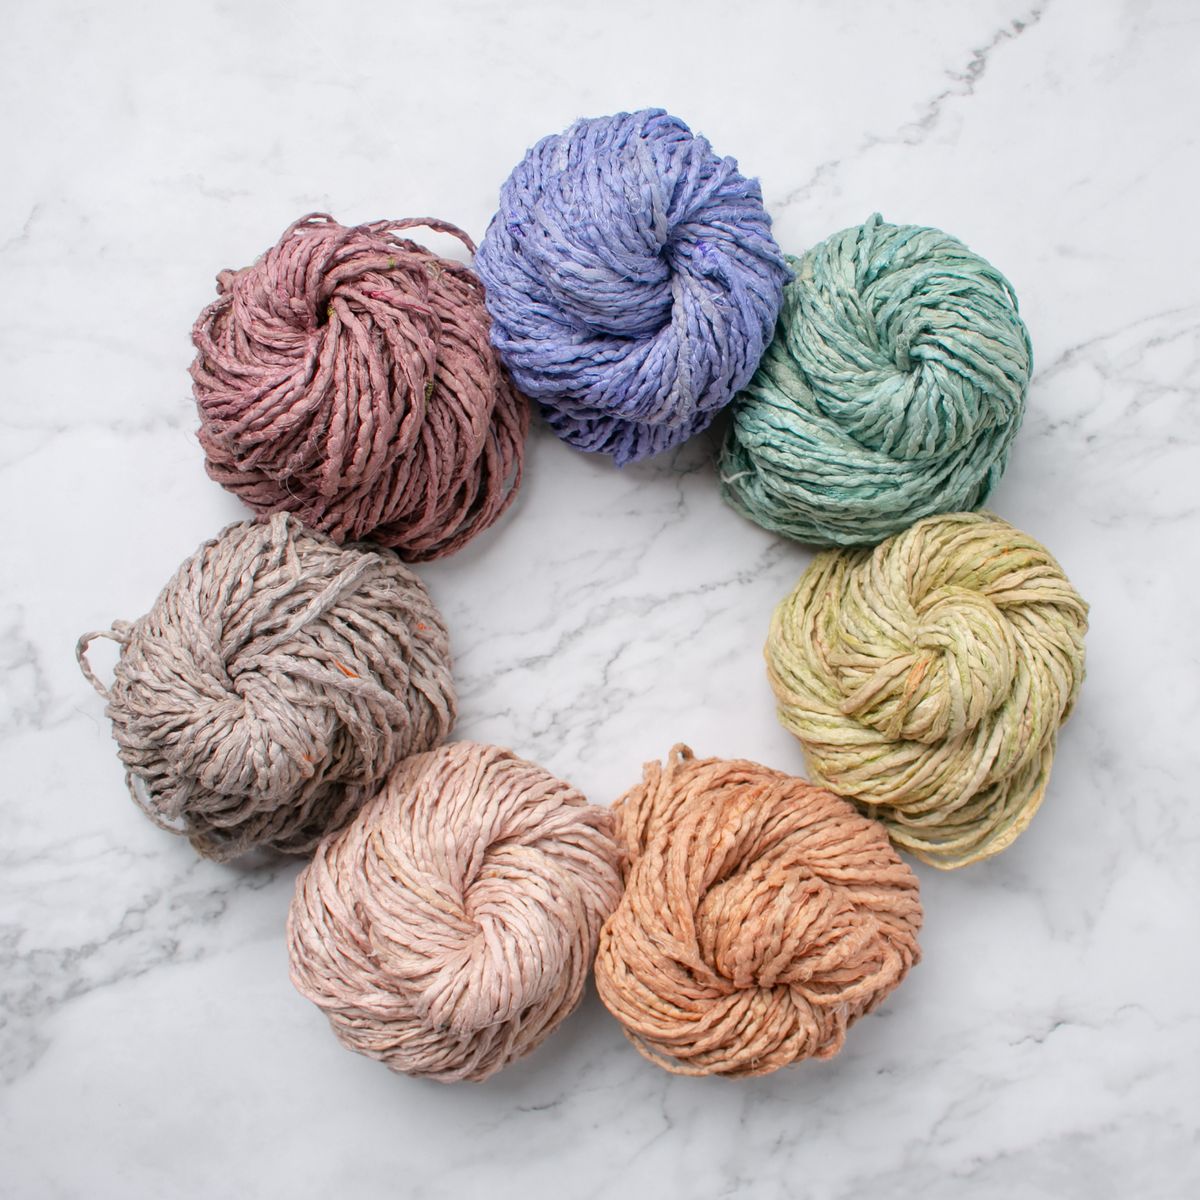 Embroidered Recycled Sari Silk Yarn - Muted Clay